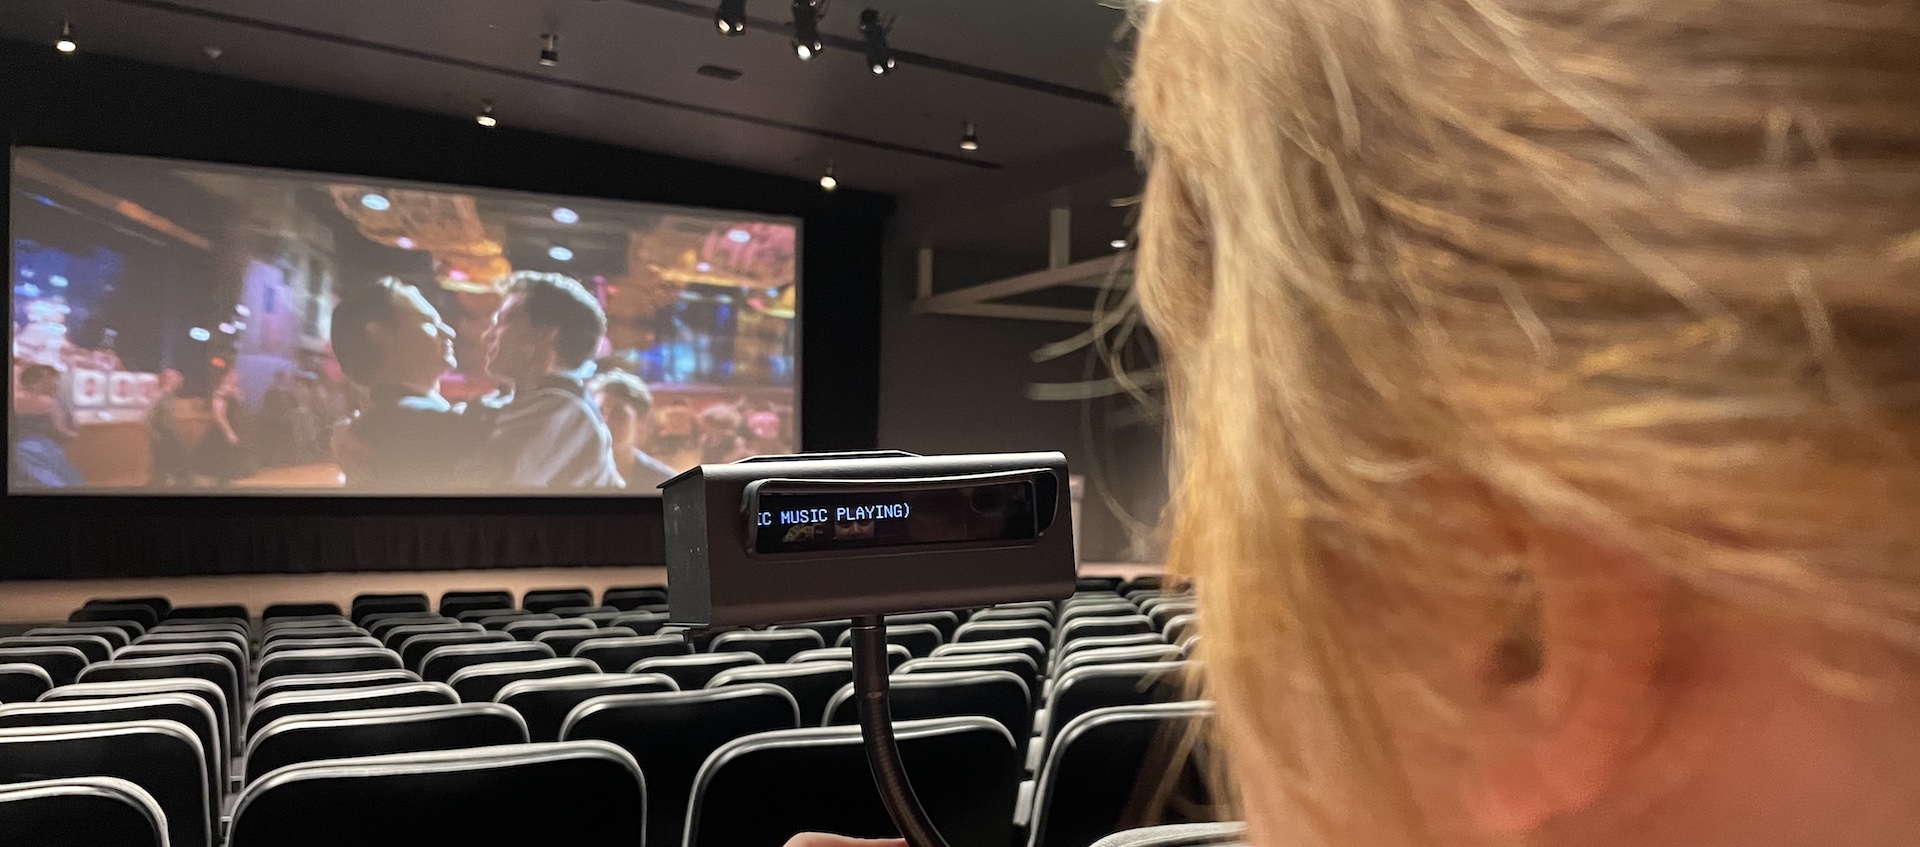 Woman sits in a movie theater and uses a hand-held device to see close captioning for a film on screen.